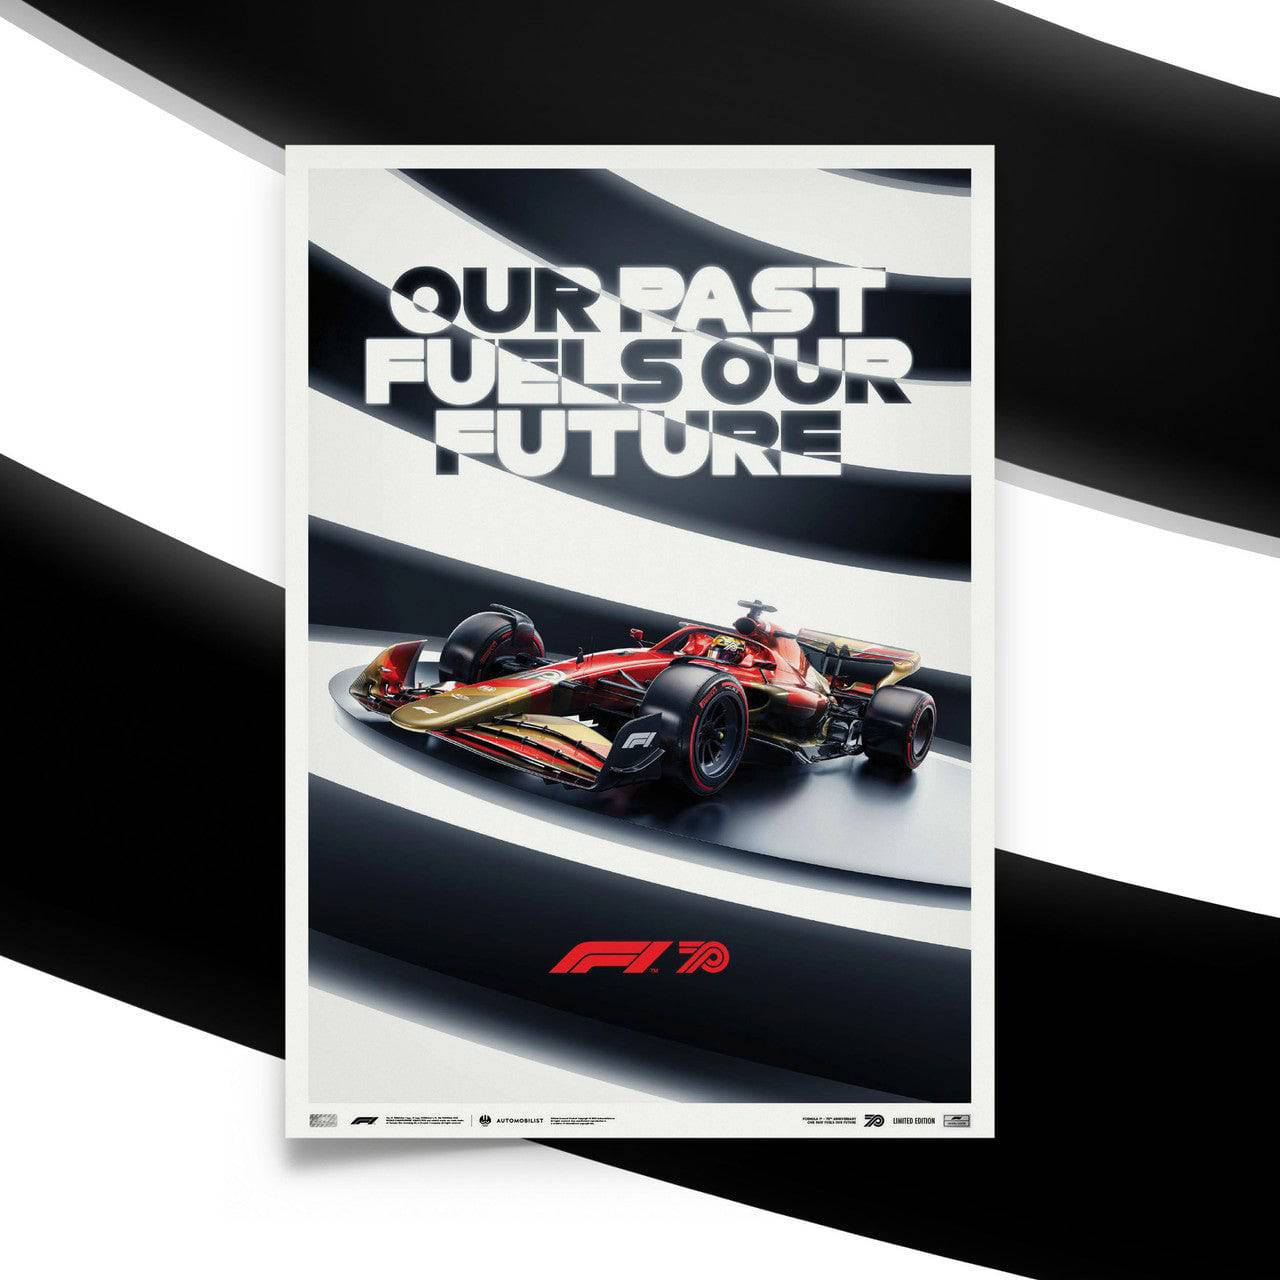 FORMULA 1® OUR PAST FUELS OUR FUTURE - 70TH ANNIVERSARY | Limited Edition